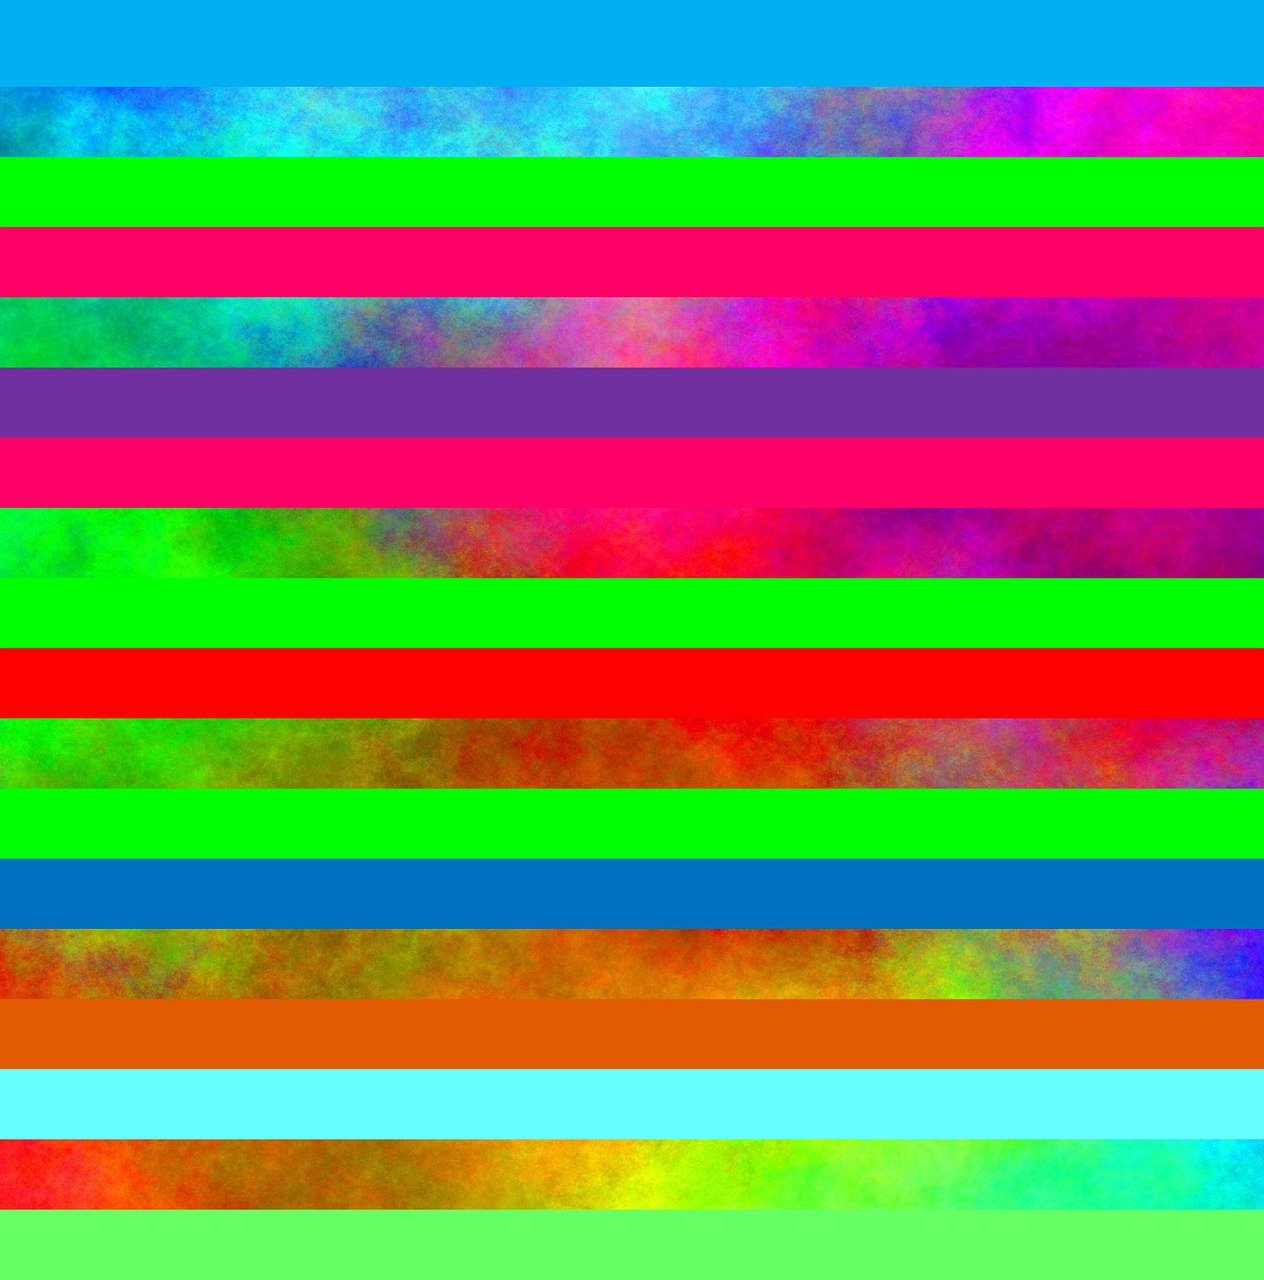 a blurry photo of a multicolored background, a digital painting, inspired by Victor Moscoso, flickr, color field, rainbow neon strips, blue and green and red tones, 1128x191 resolution, guillotine rgb